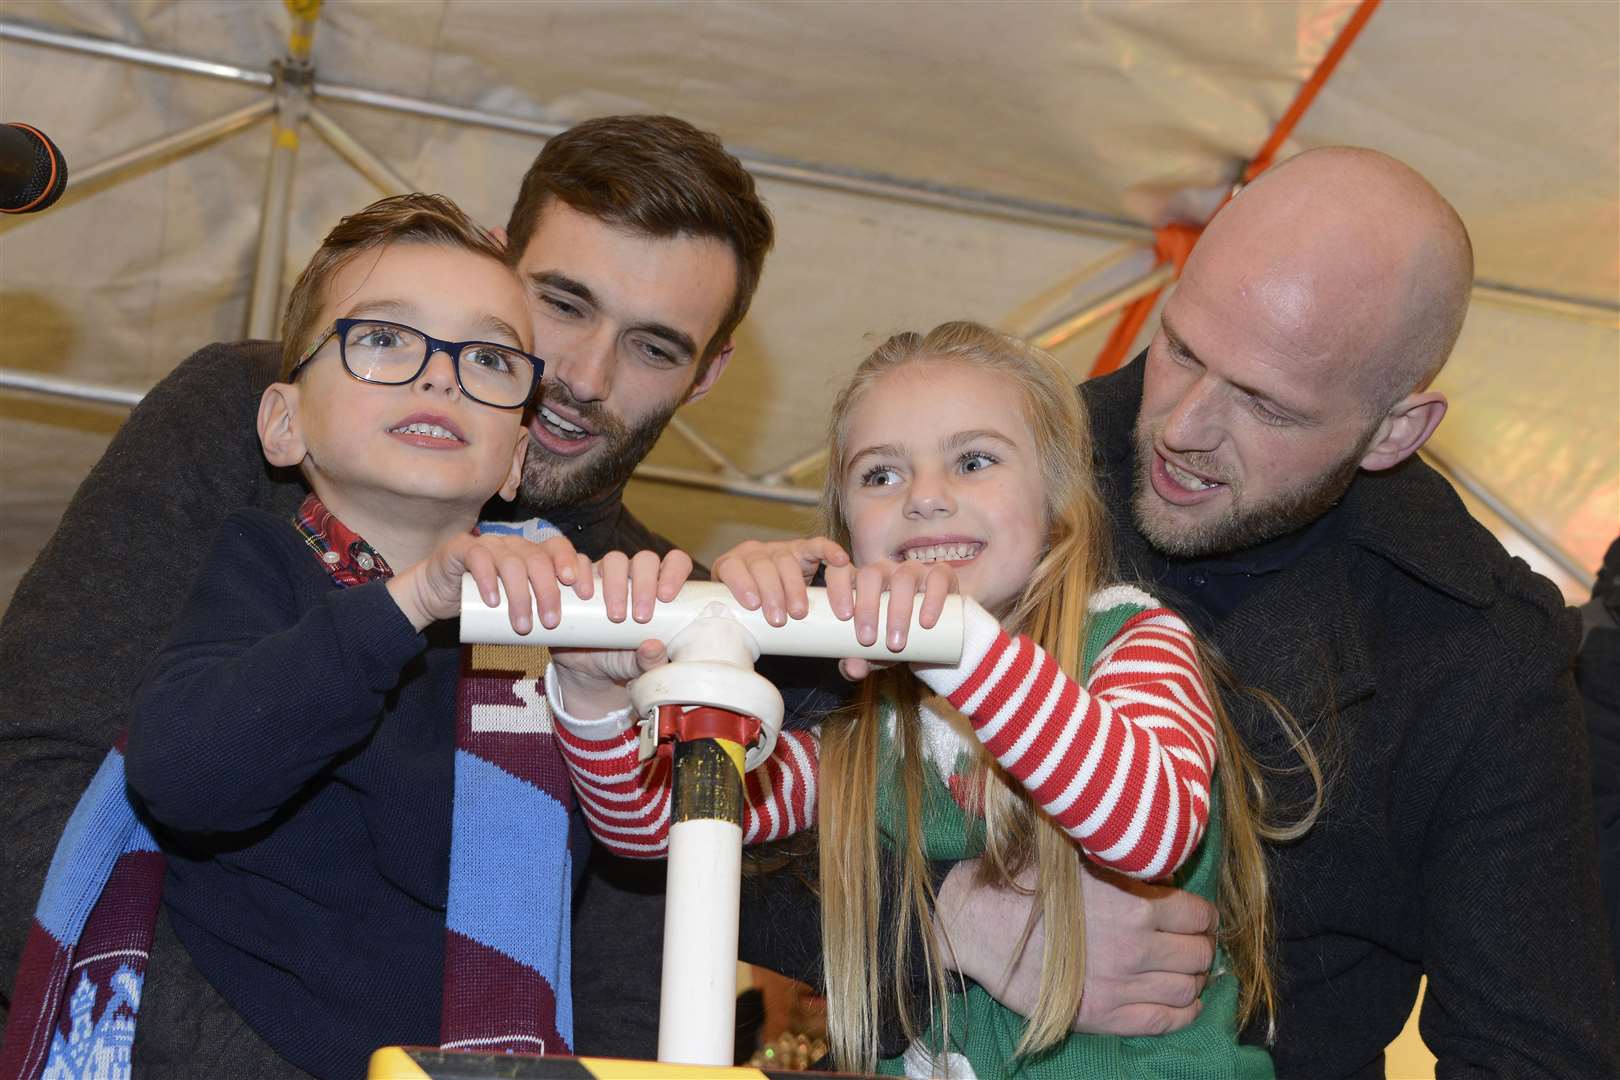 The Christmas switch on has been conducted by local heroes like Ellice Barr and Theo Knott in the past three years. Picture: Paul Amos